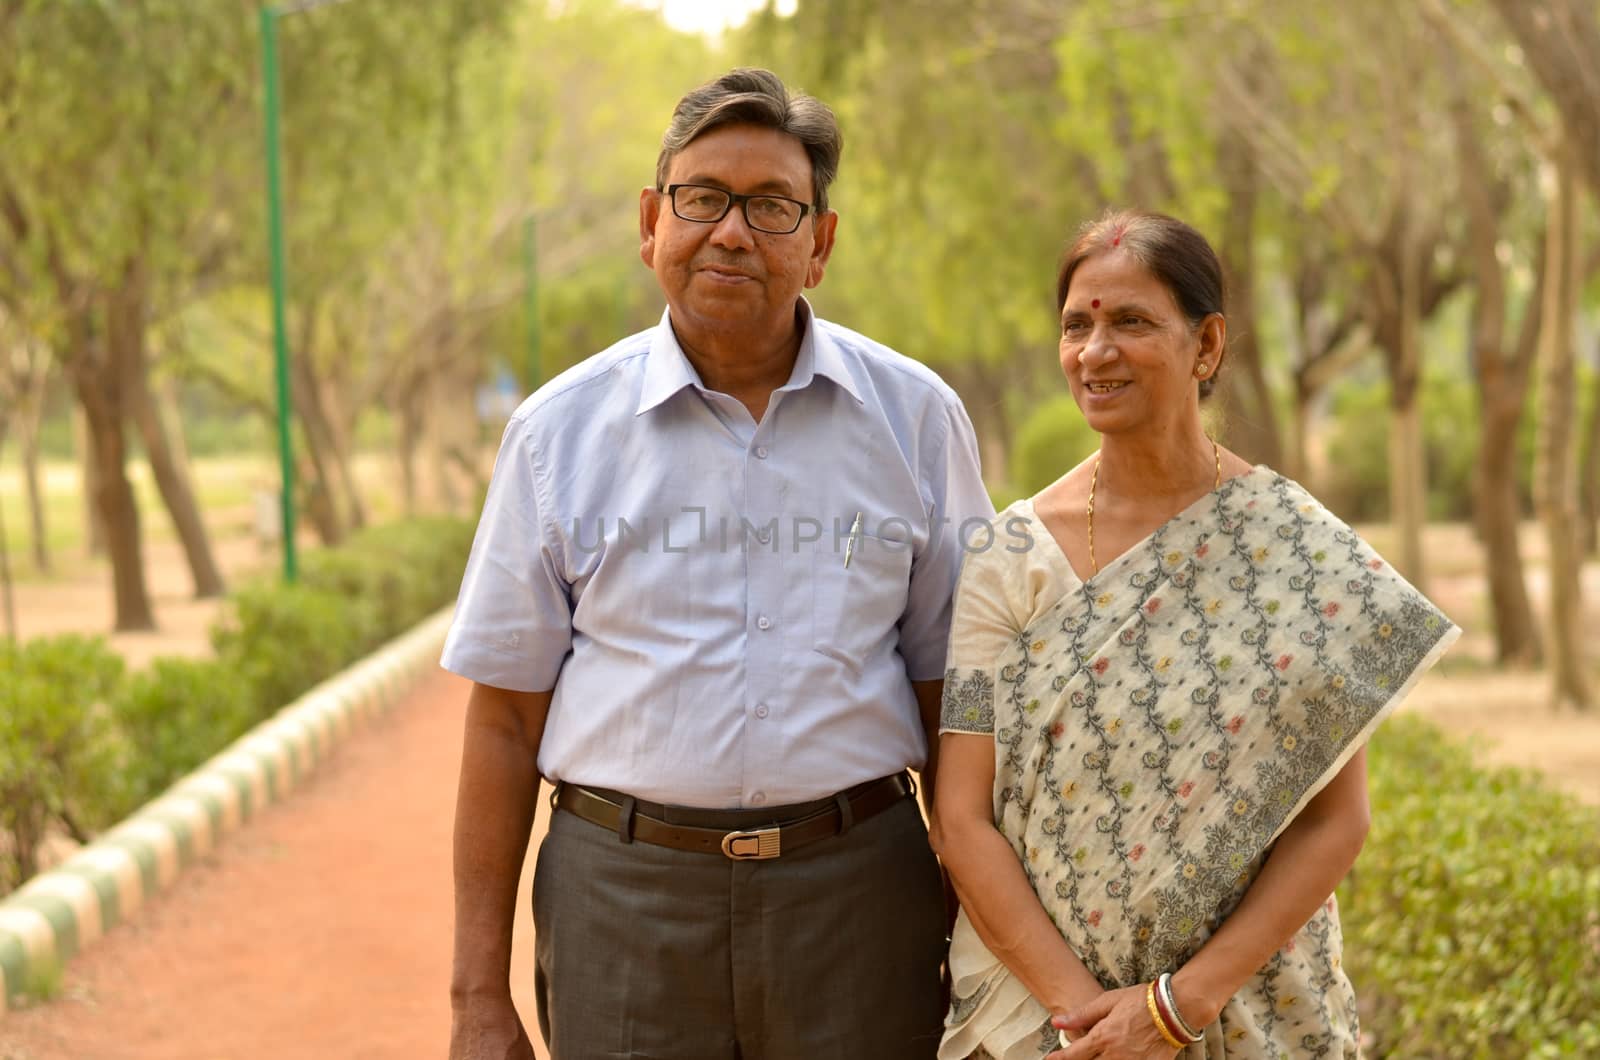 Happy looking retired senior Indian man and woman couple smiling and posing in a park outdoor setting in New Delhi, India. Concept love